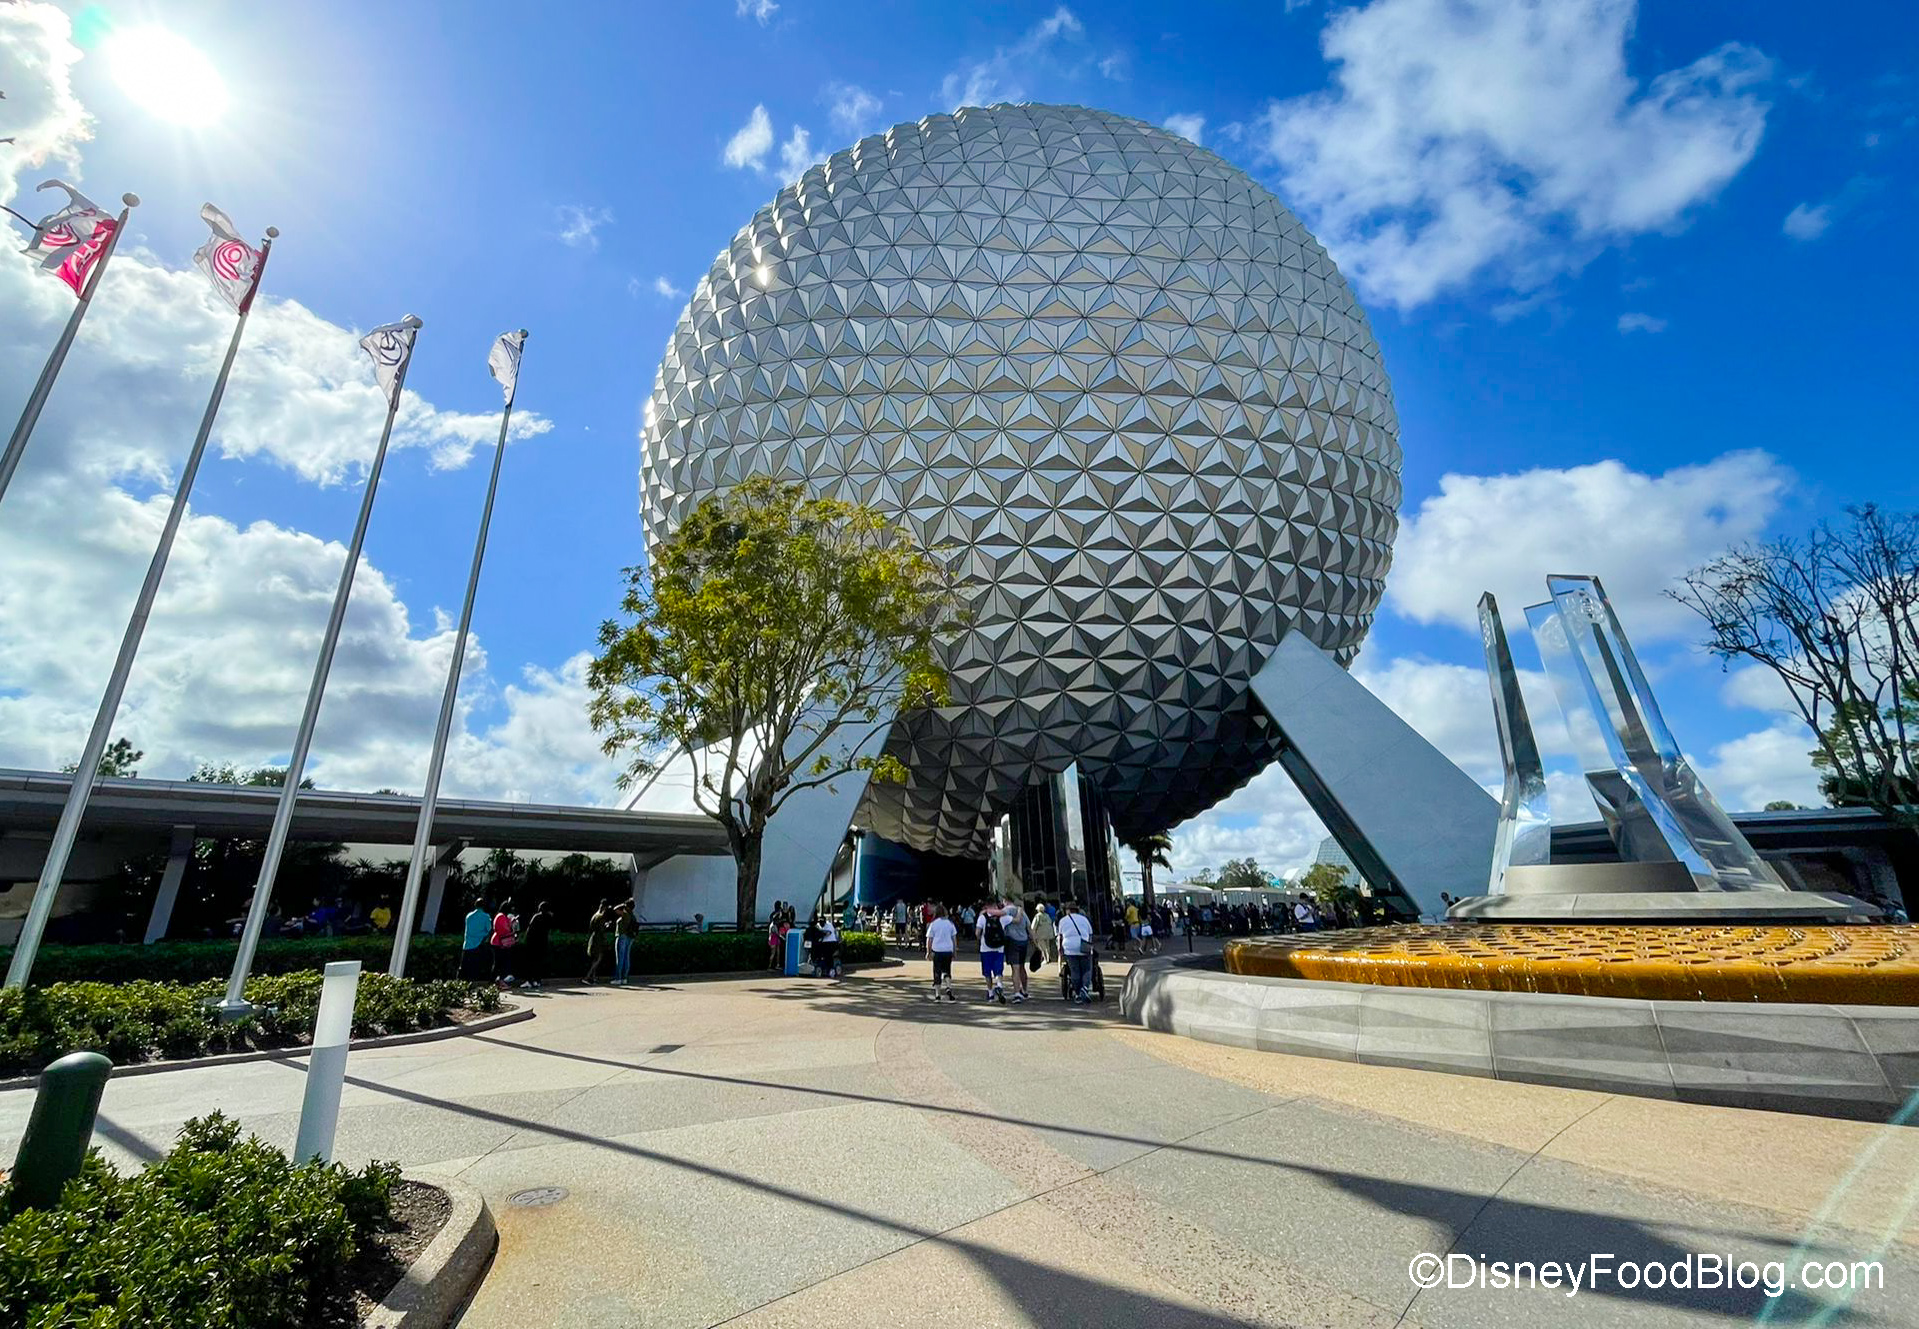 The Top 3 Table Service Restaurants in EPCOT, According to Yelp